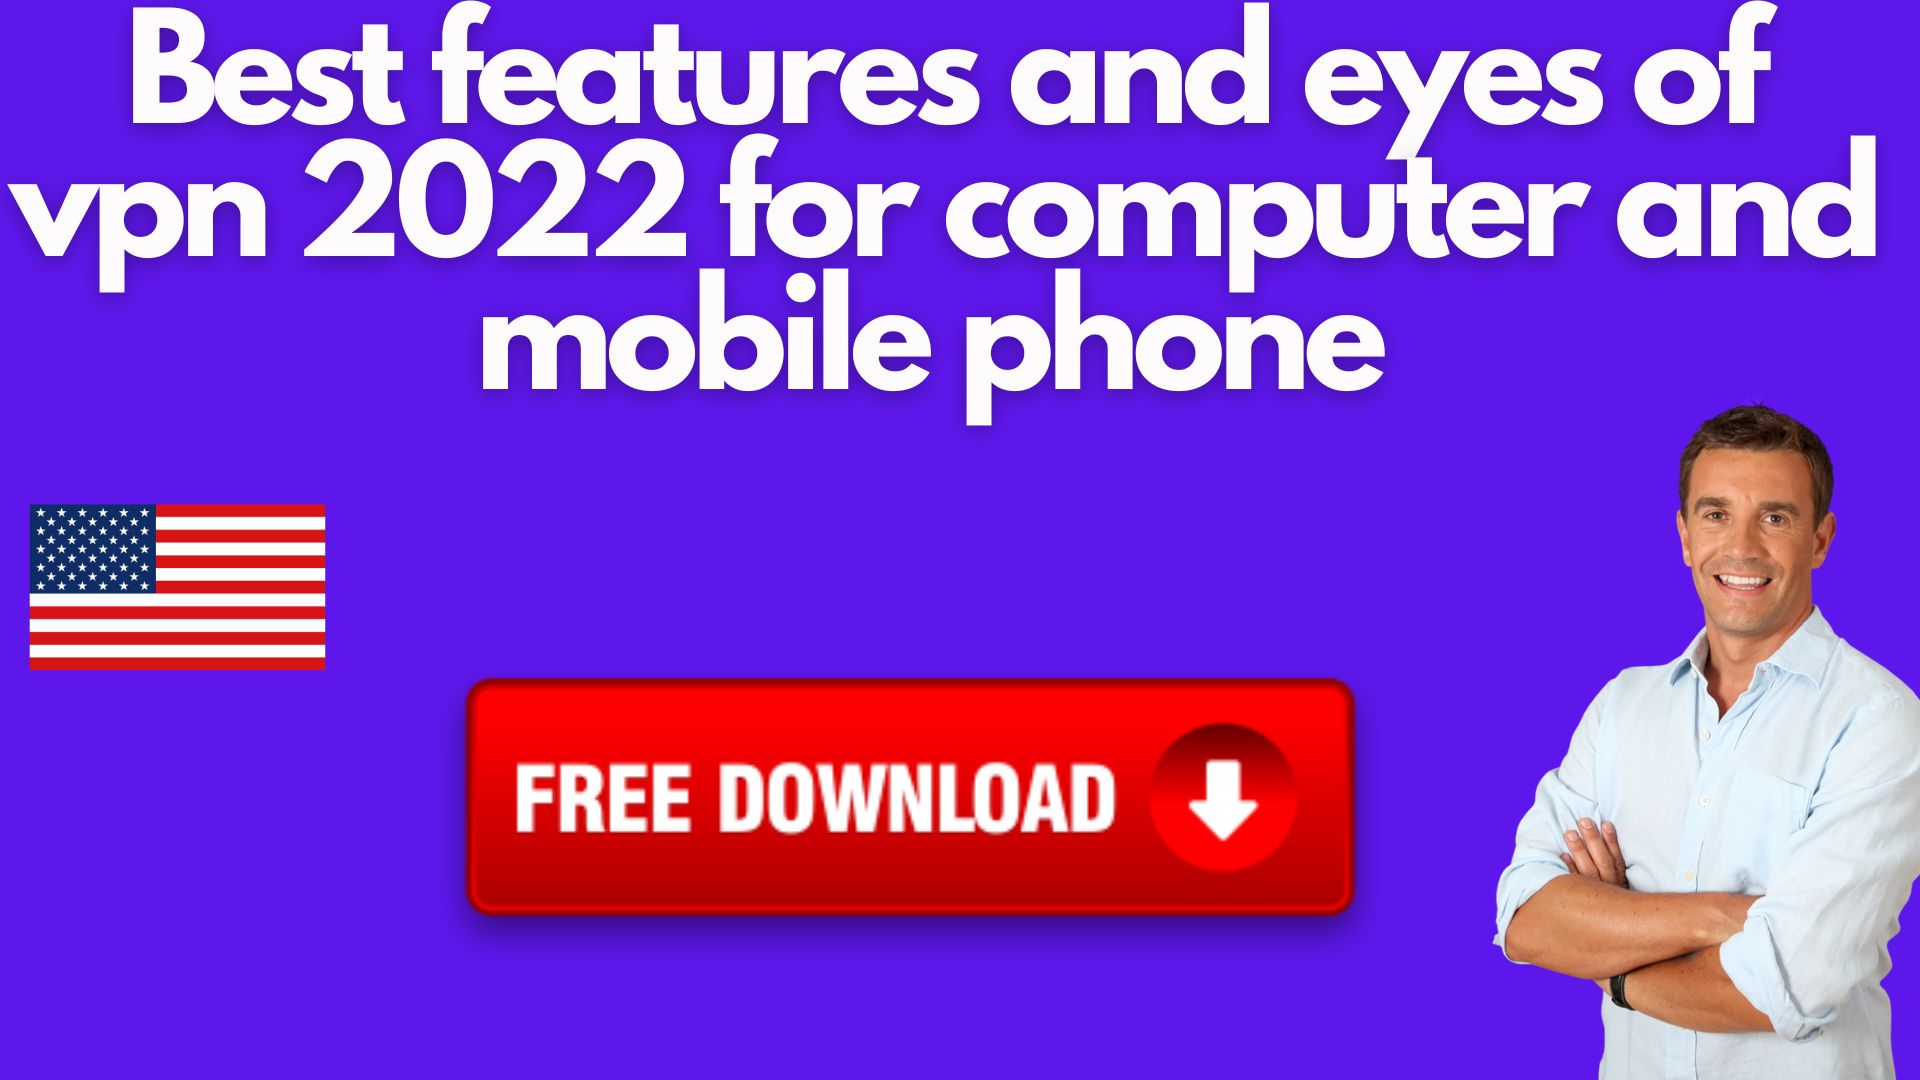 Best features and eyes of vpn 2022 for computer and mobile phone 